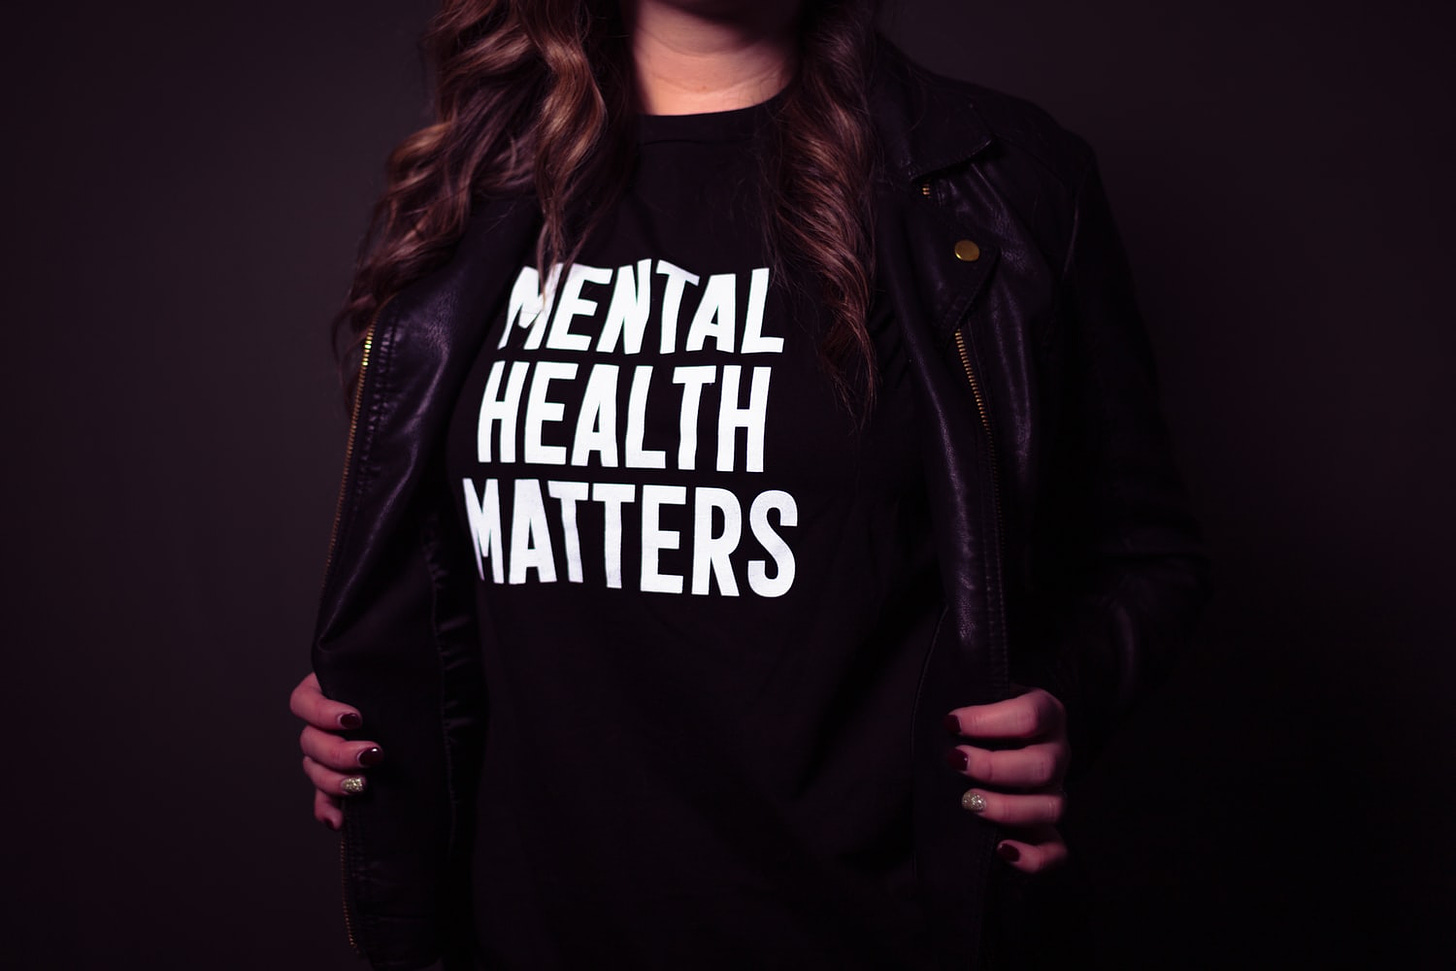 Person wearing t-shirt that says, "Mental Health Matters."